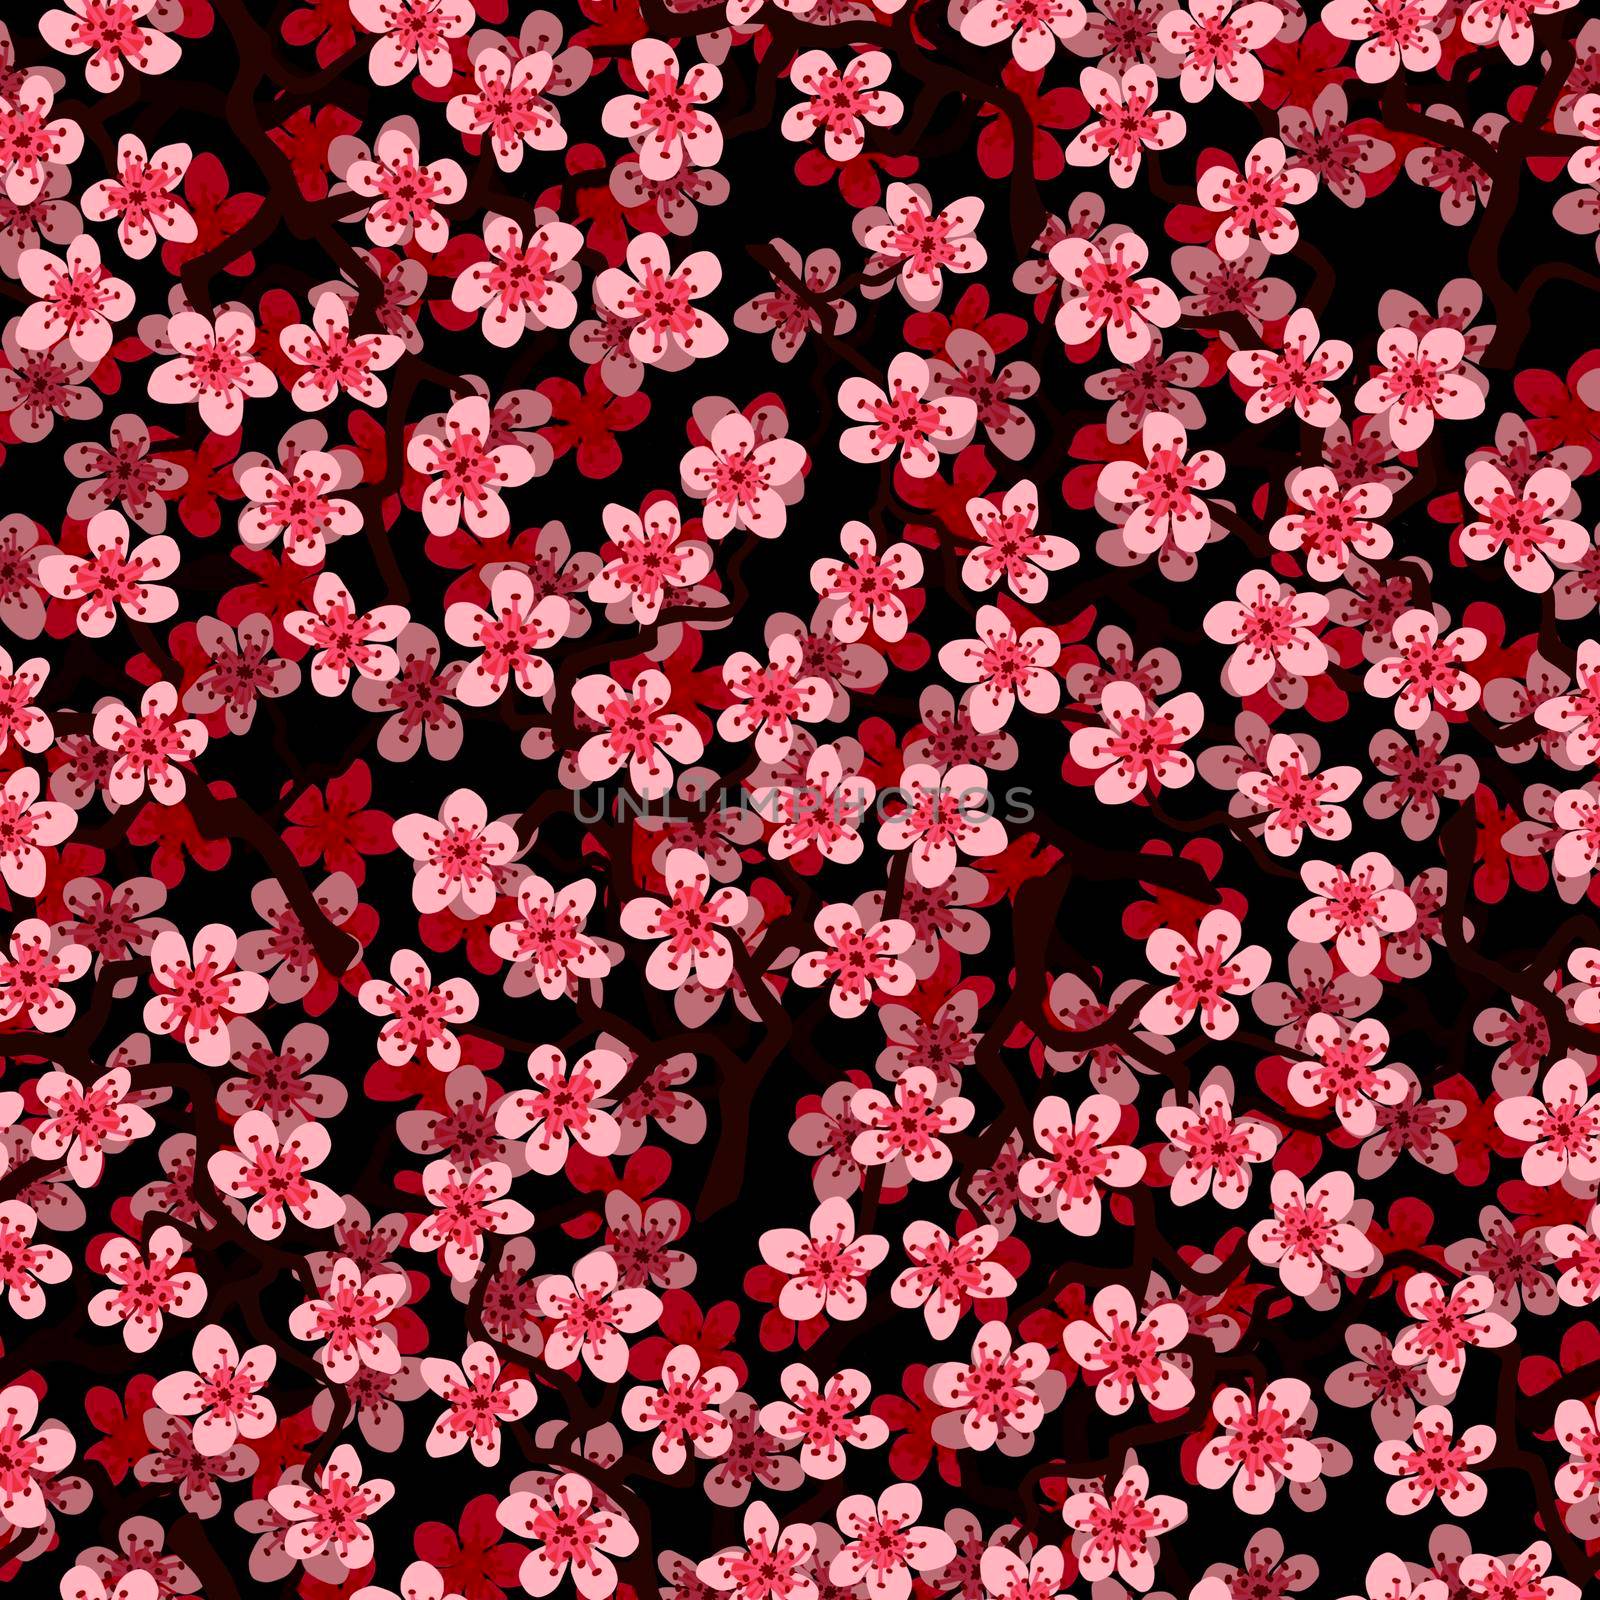 Seamless pattern with blossoming Japanese cherry sakura branches for fabric,packaging,wallpaper,textile decor,design, invitations,print,gift wrap,manufacturing.Pink flowers on black background